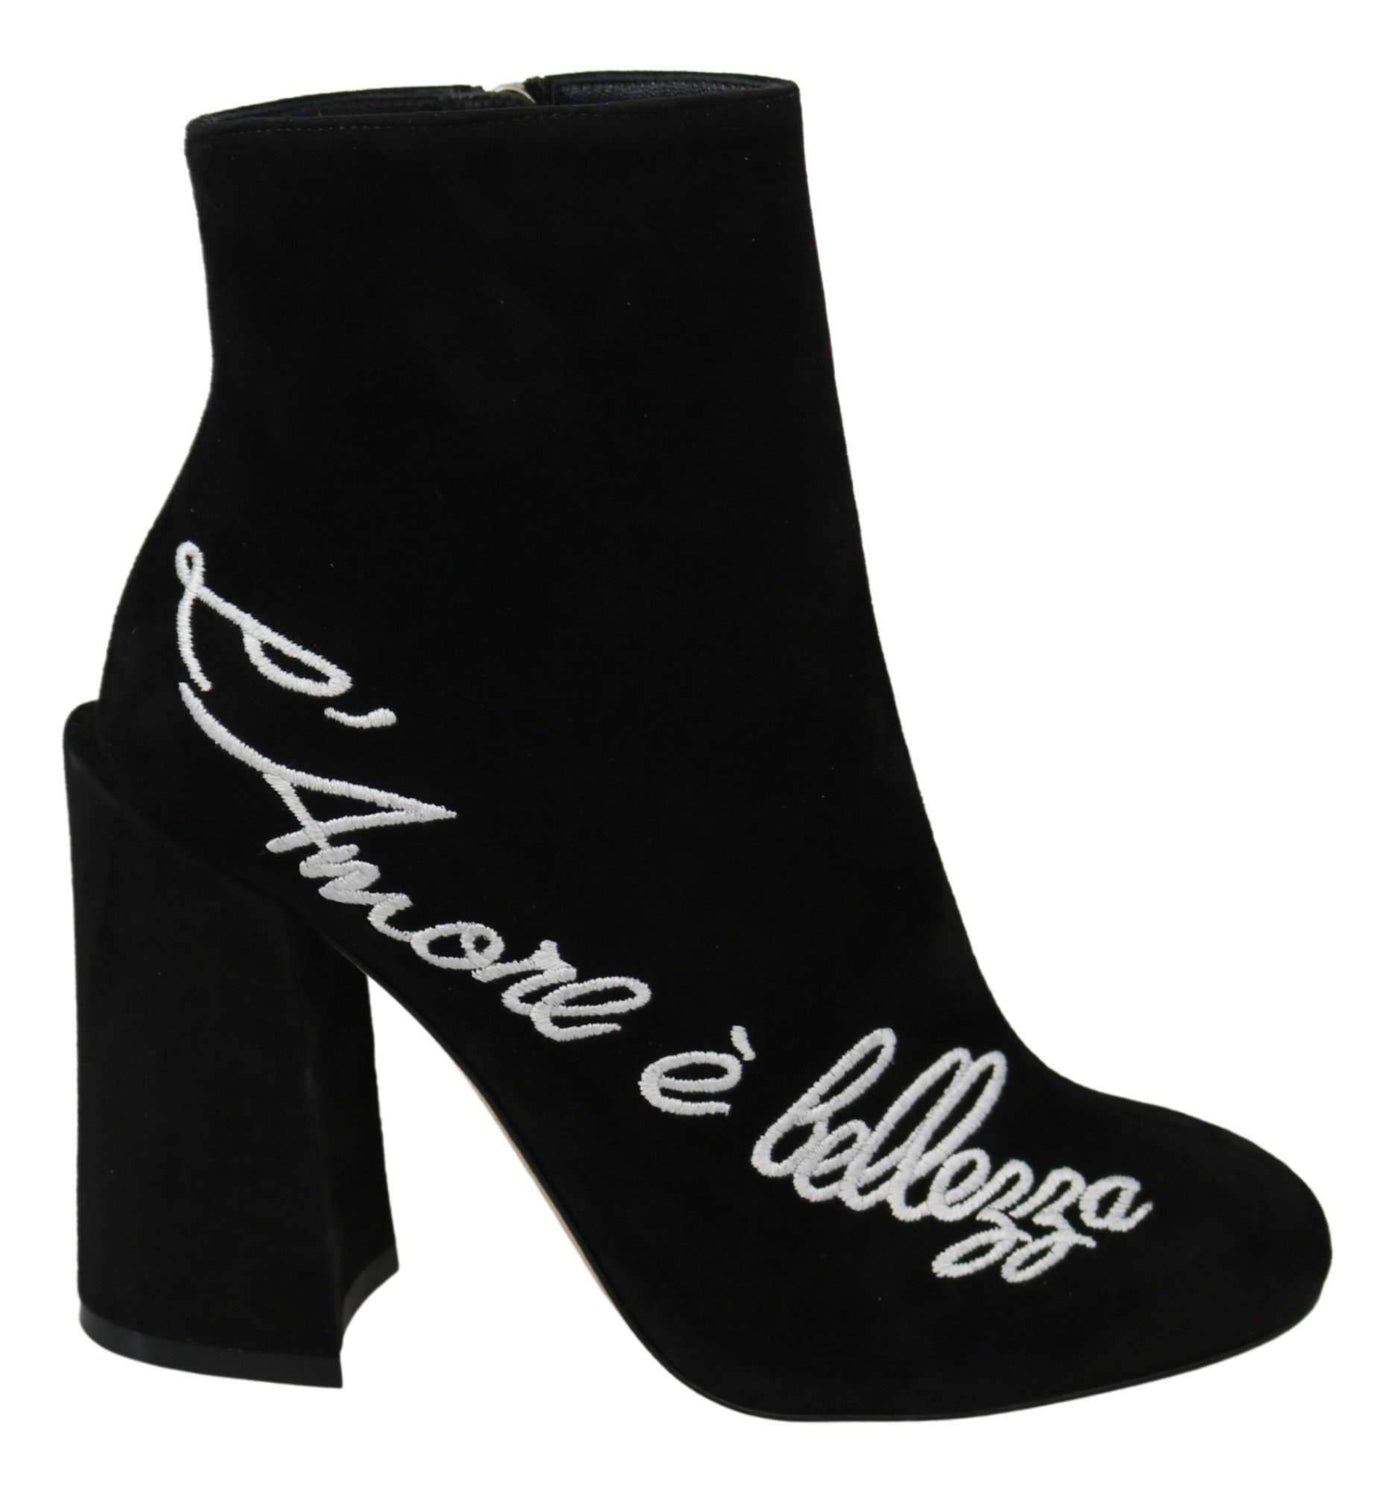 Dolce & Gabbana Black Suede L'Amore E'Bellezza Boots Shoes #women, Black, Boots - Women - Shoes, Brand_Dolce & Gabbana, Dolce & Gabbana, EU35/US4.5, EU36/US5.5, EU41/US10.5, feed-agegroup-adult, feed-color-black, feed-gender-female, feed-size-US4.5, Gender_Women, Shoes - New Arrivals at SEYMAYKA